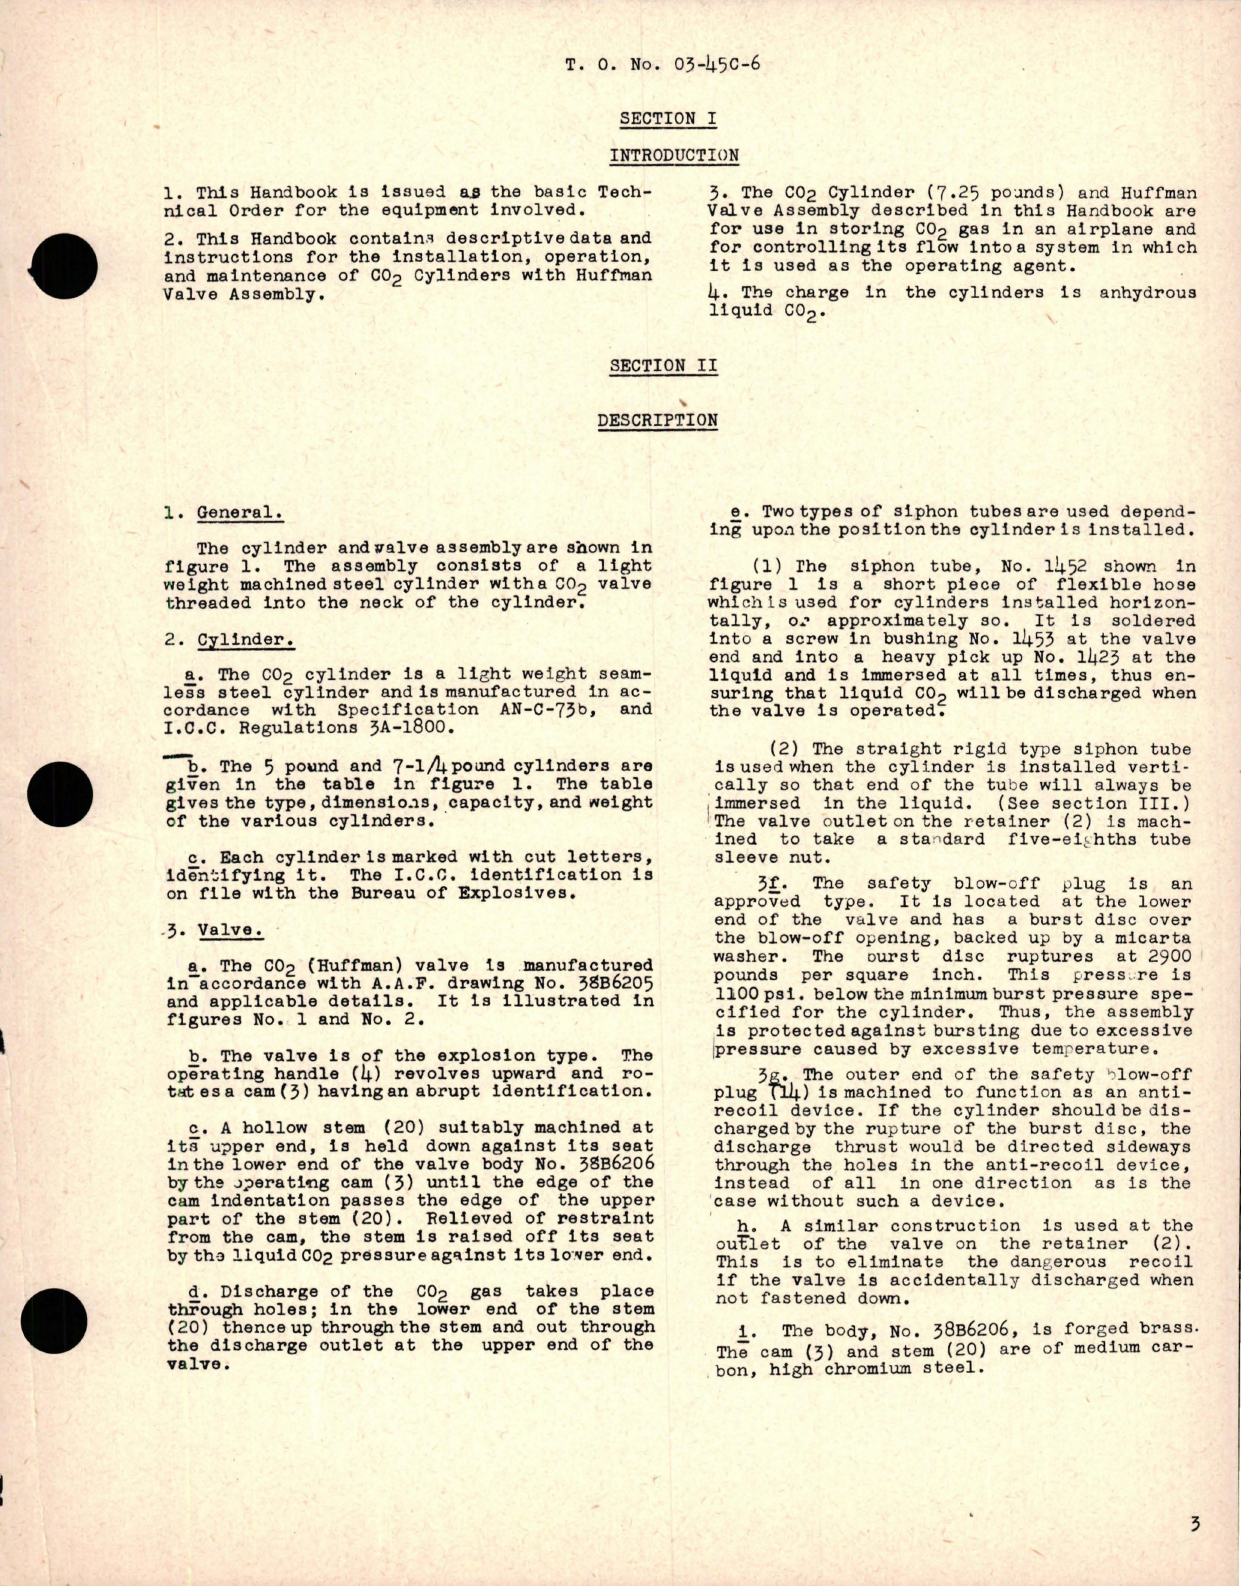 Sample page 5 from AirCorps Library document: Operation, Service and Overhaul Instructions with Parts Catalog for CO2 Cylinder & Valve Assembly 